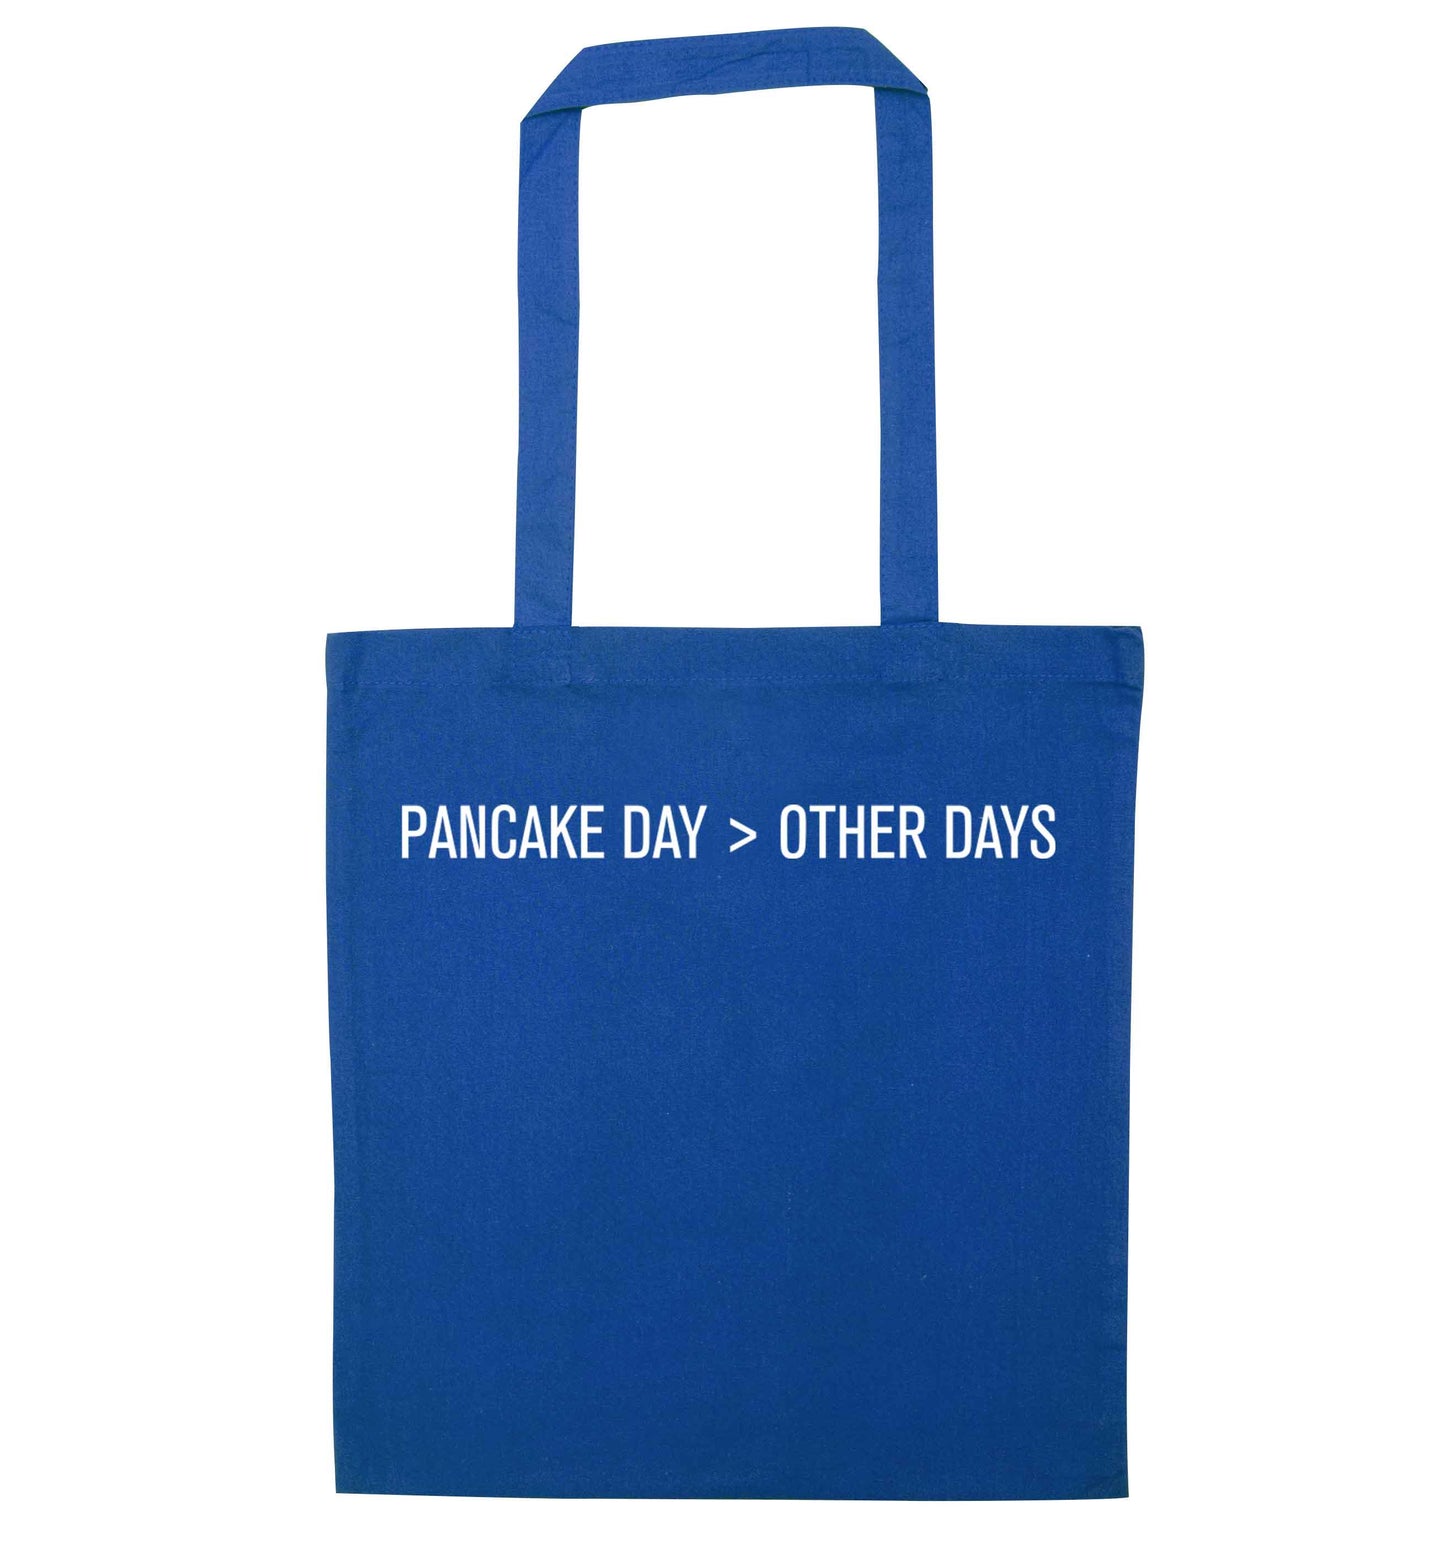 Pancake day > other days blue tote bag